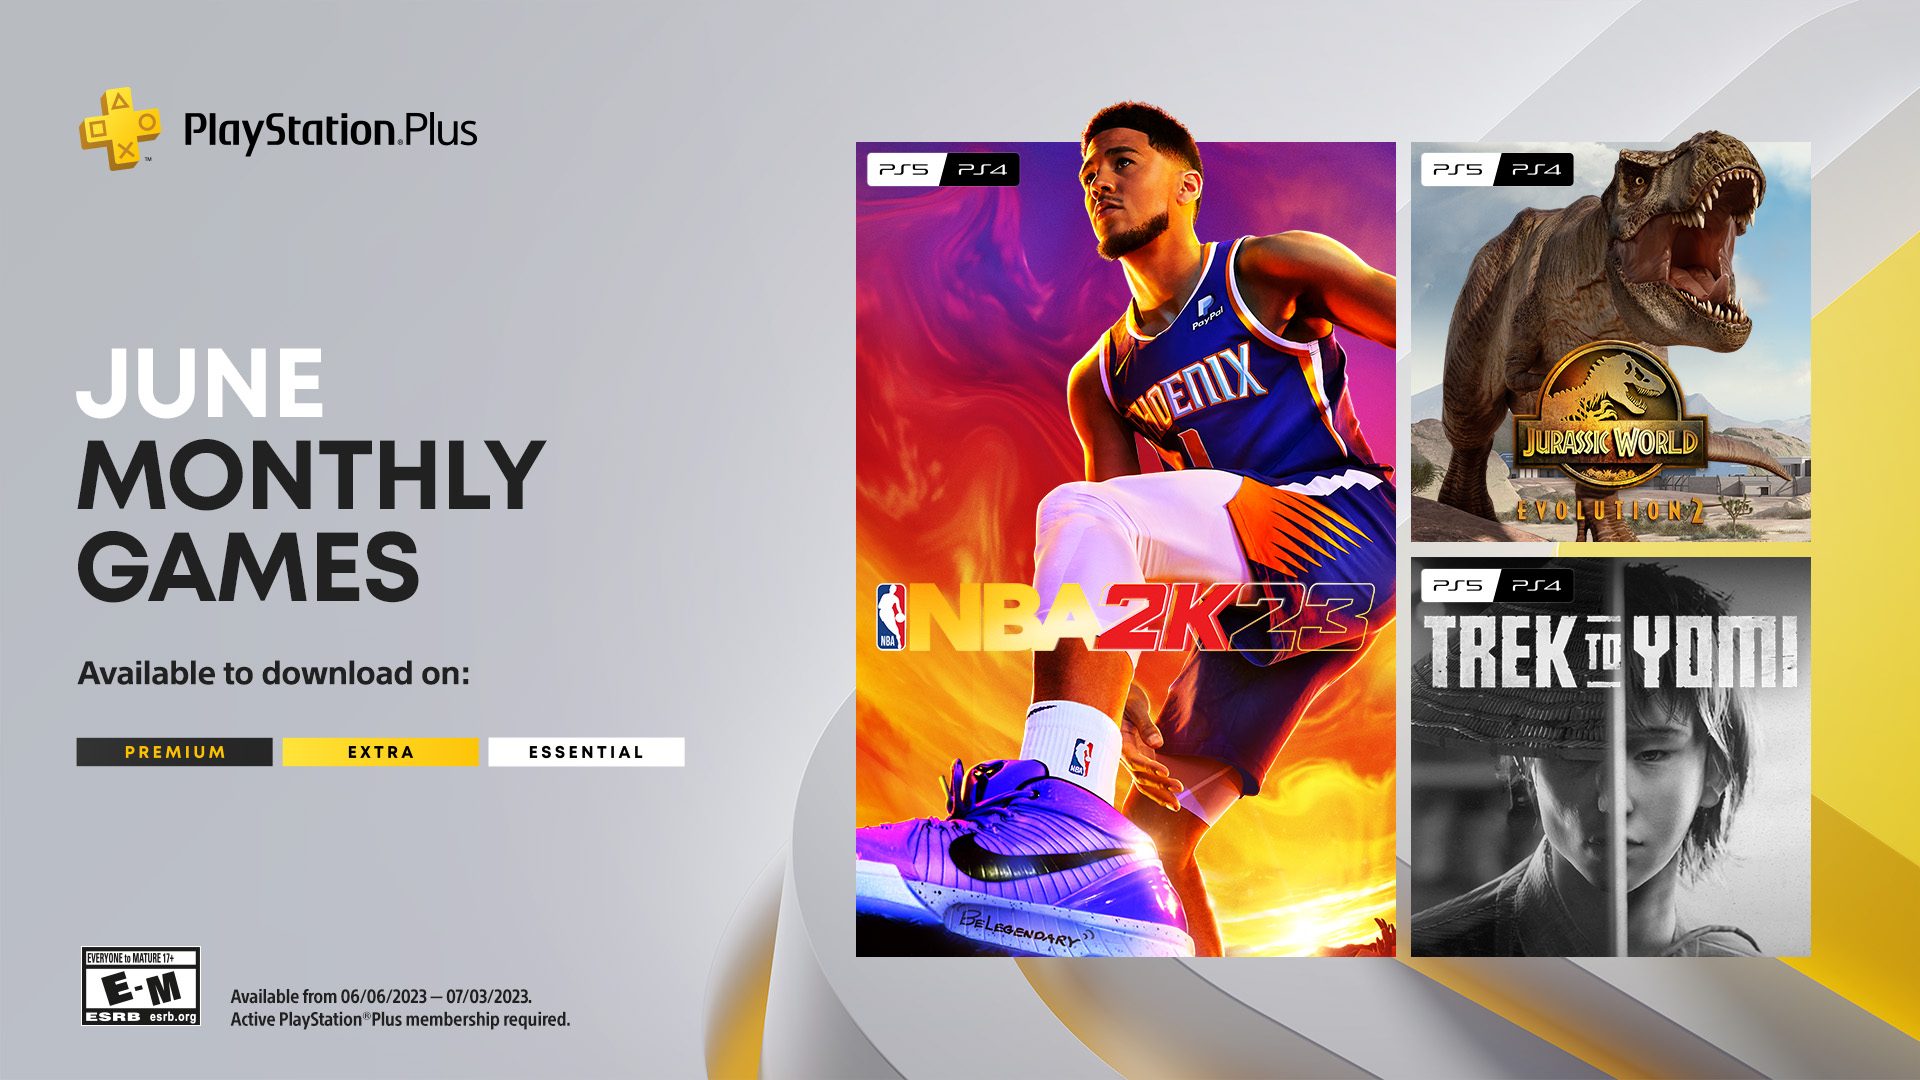 PlayStation Plus Monthly Games for NBA 2K23, Jurassic World Evolution 2 and to Yomi PlayStation.Blog